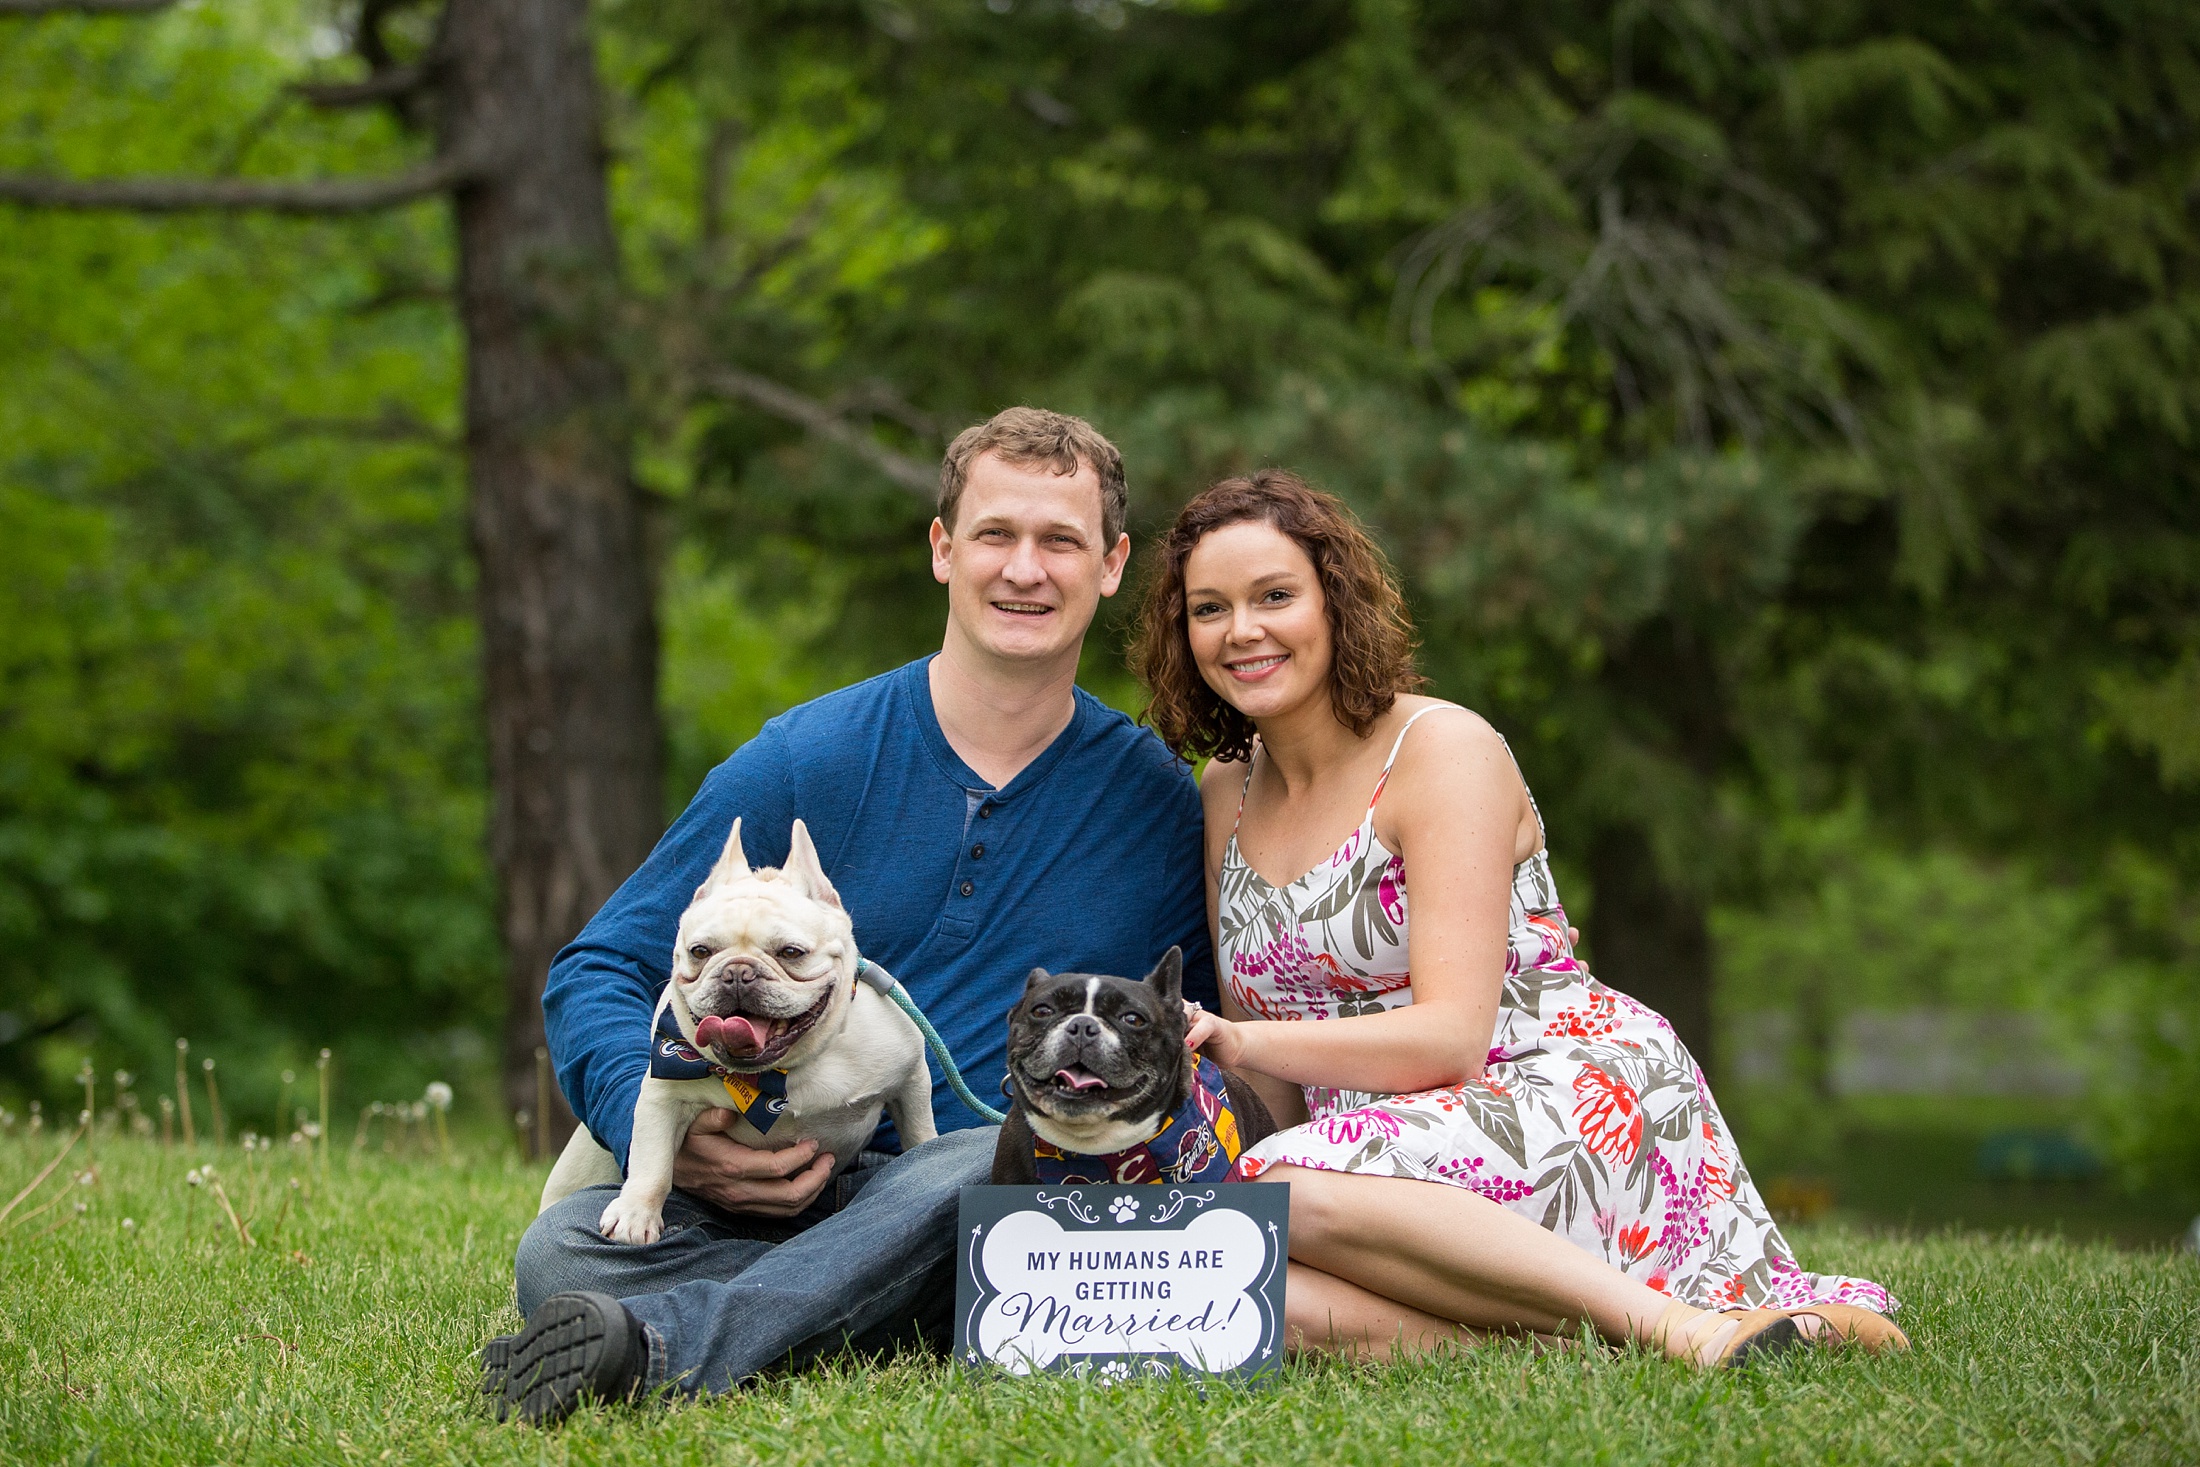 Spring Engagement Session at Sycamore Hill Gardens